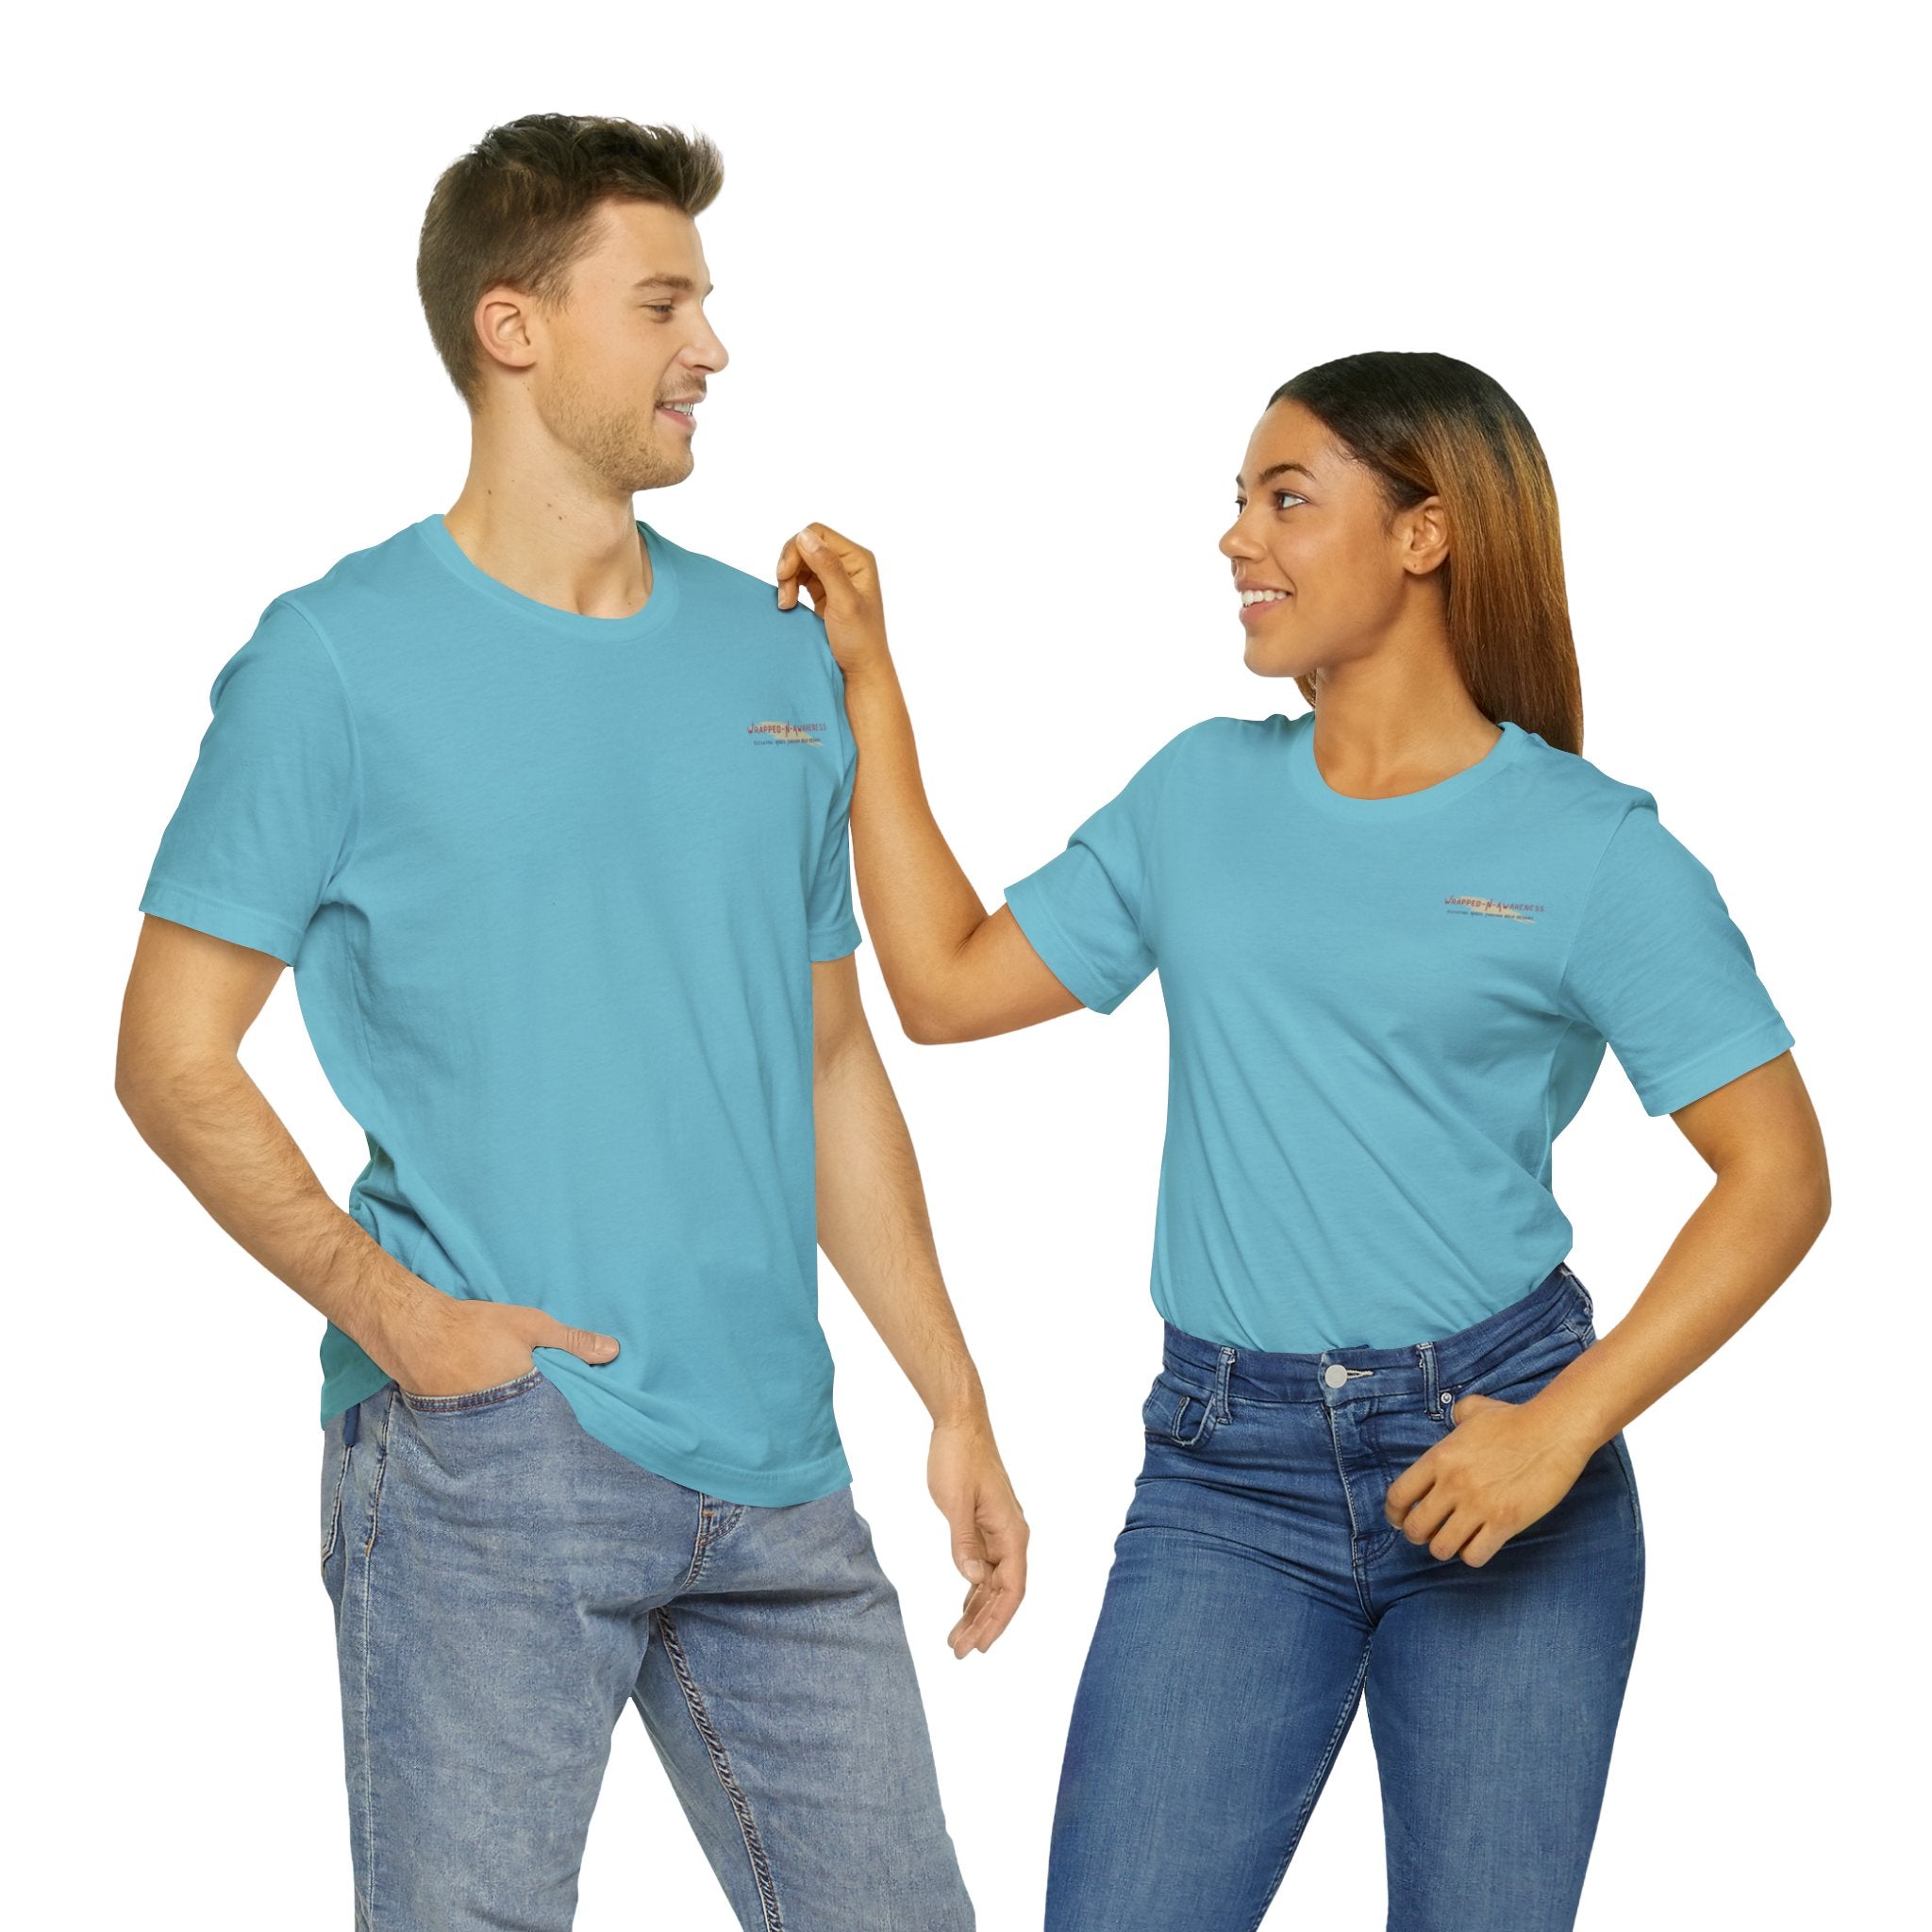 Inspire Growth Jersey Tee - Bella+Canvas 3001 Turquoise Airlume Cotton Bella+Canvas 3001 Crew Neckline Jersey Short Sleeve Lightweight Fabric Mental Health Support Retail Fit Tear-away Label Tee Unisex Tee T-Shirt 9111824313015325794_2048 Printify